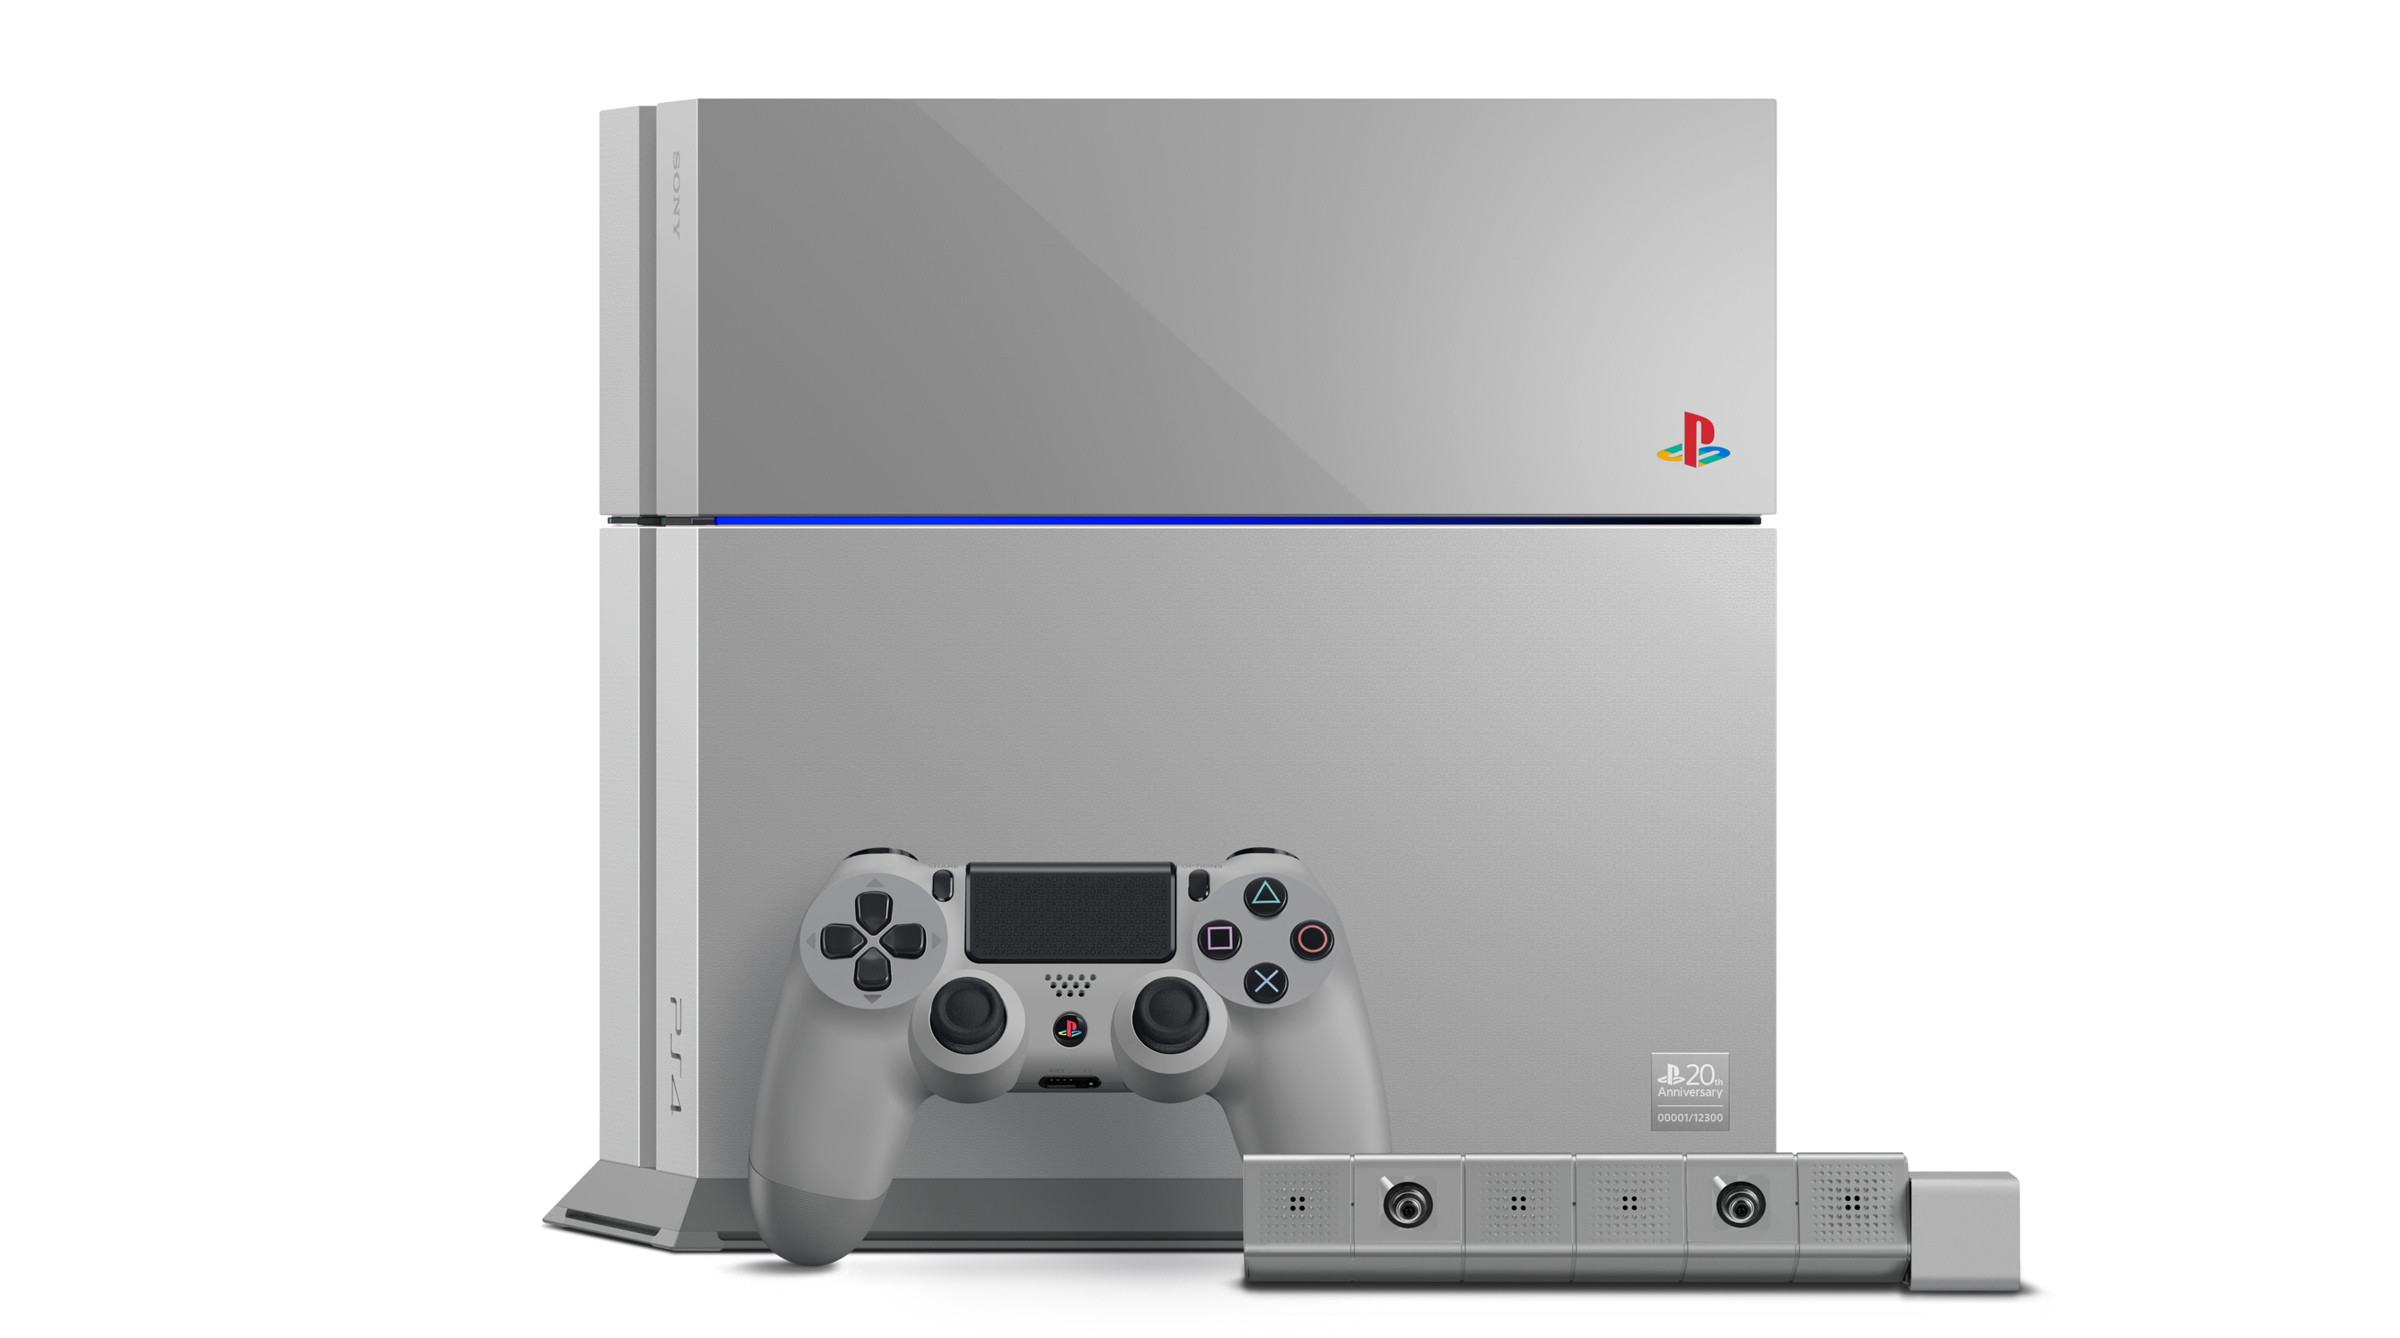 Media asset in full size related to 3dfxzone.it news item entitled as follows: Sony annuncia la PlayStation 4 20th Anniversary Limited Edition | Image Name: news21932_PlayStation-4-20th-Anniversary-Edition_1.jpg